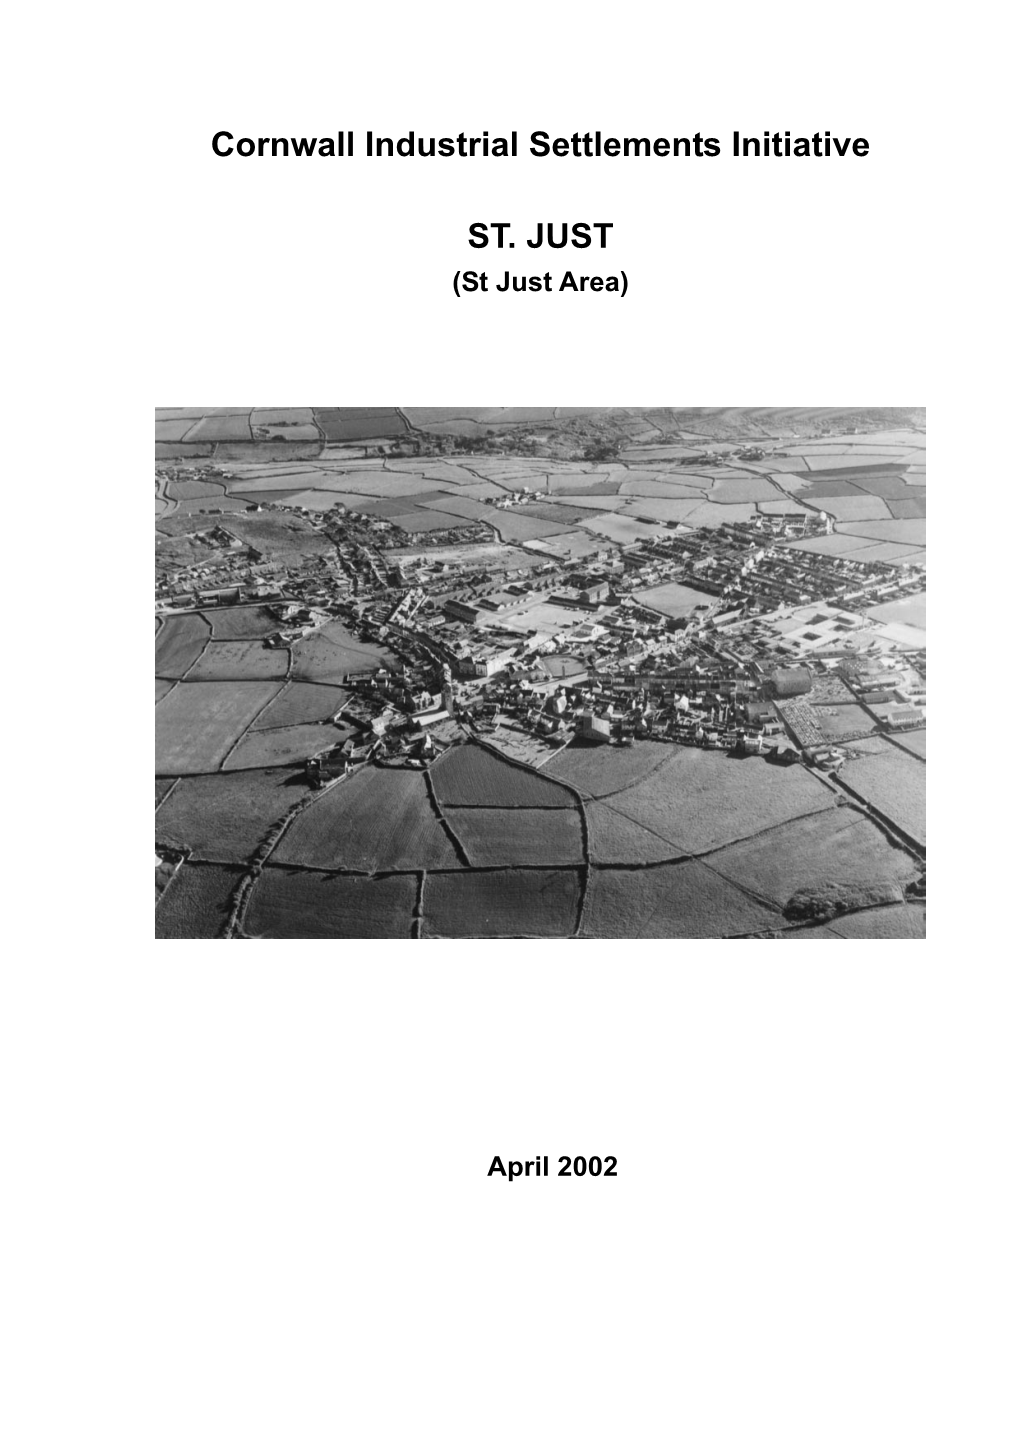 Cornwall Industrial Settlements Initiative ST. JUST